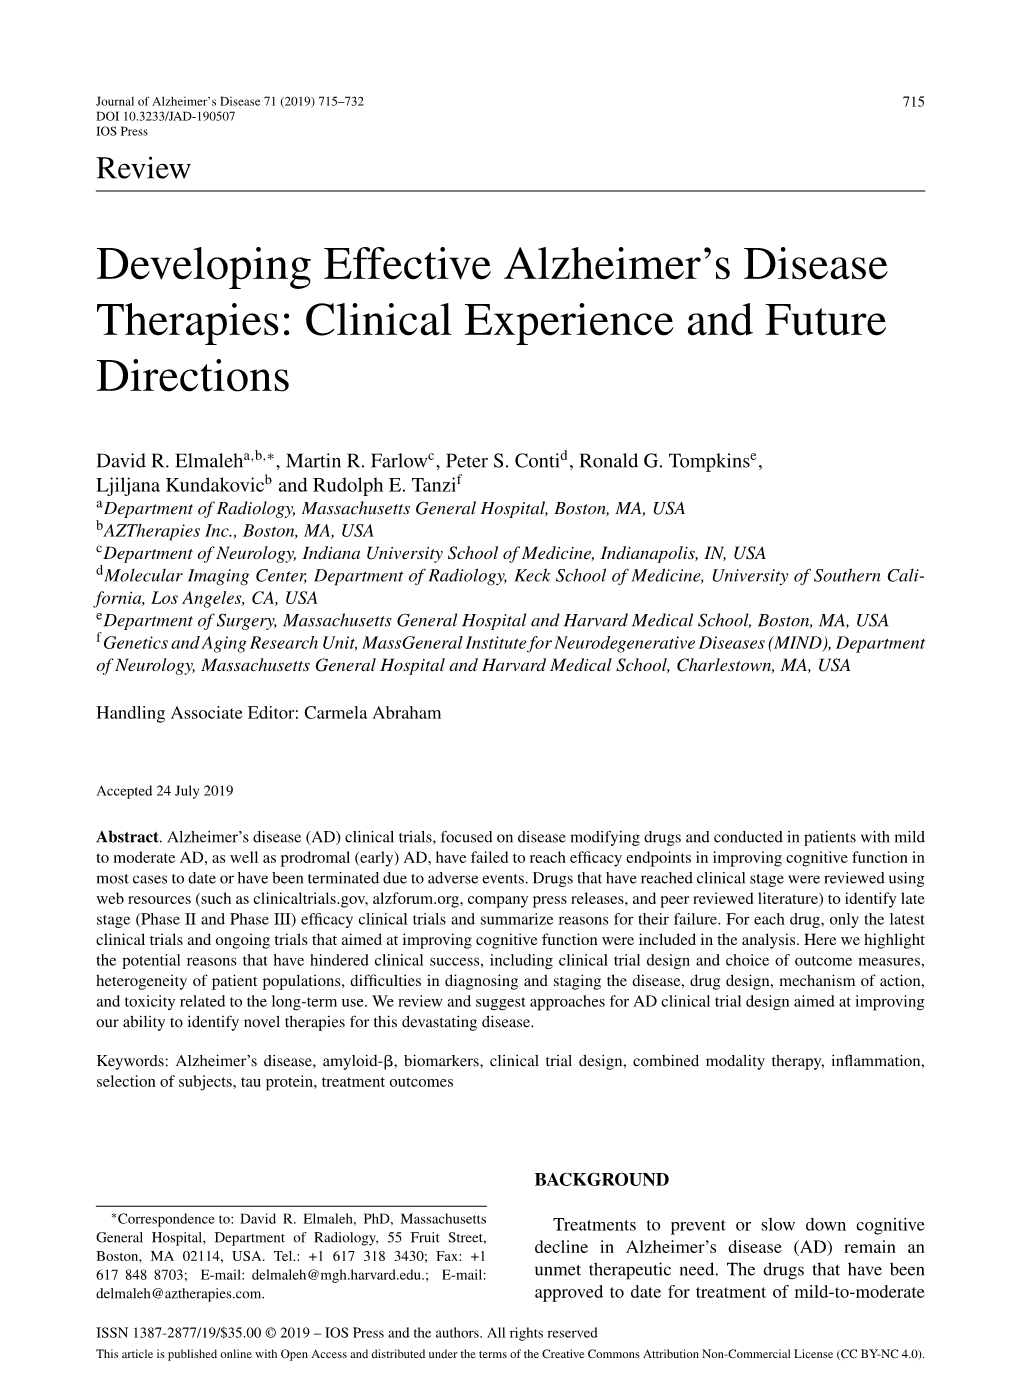 Developing Effective Alzheimer's Disease Therapies